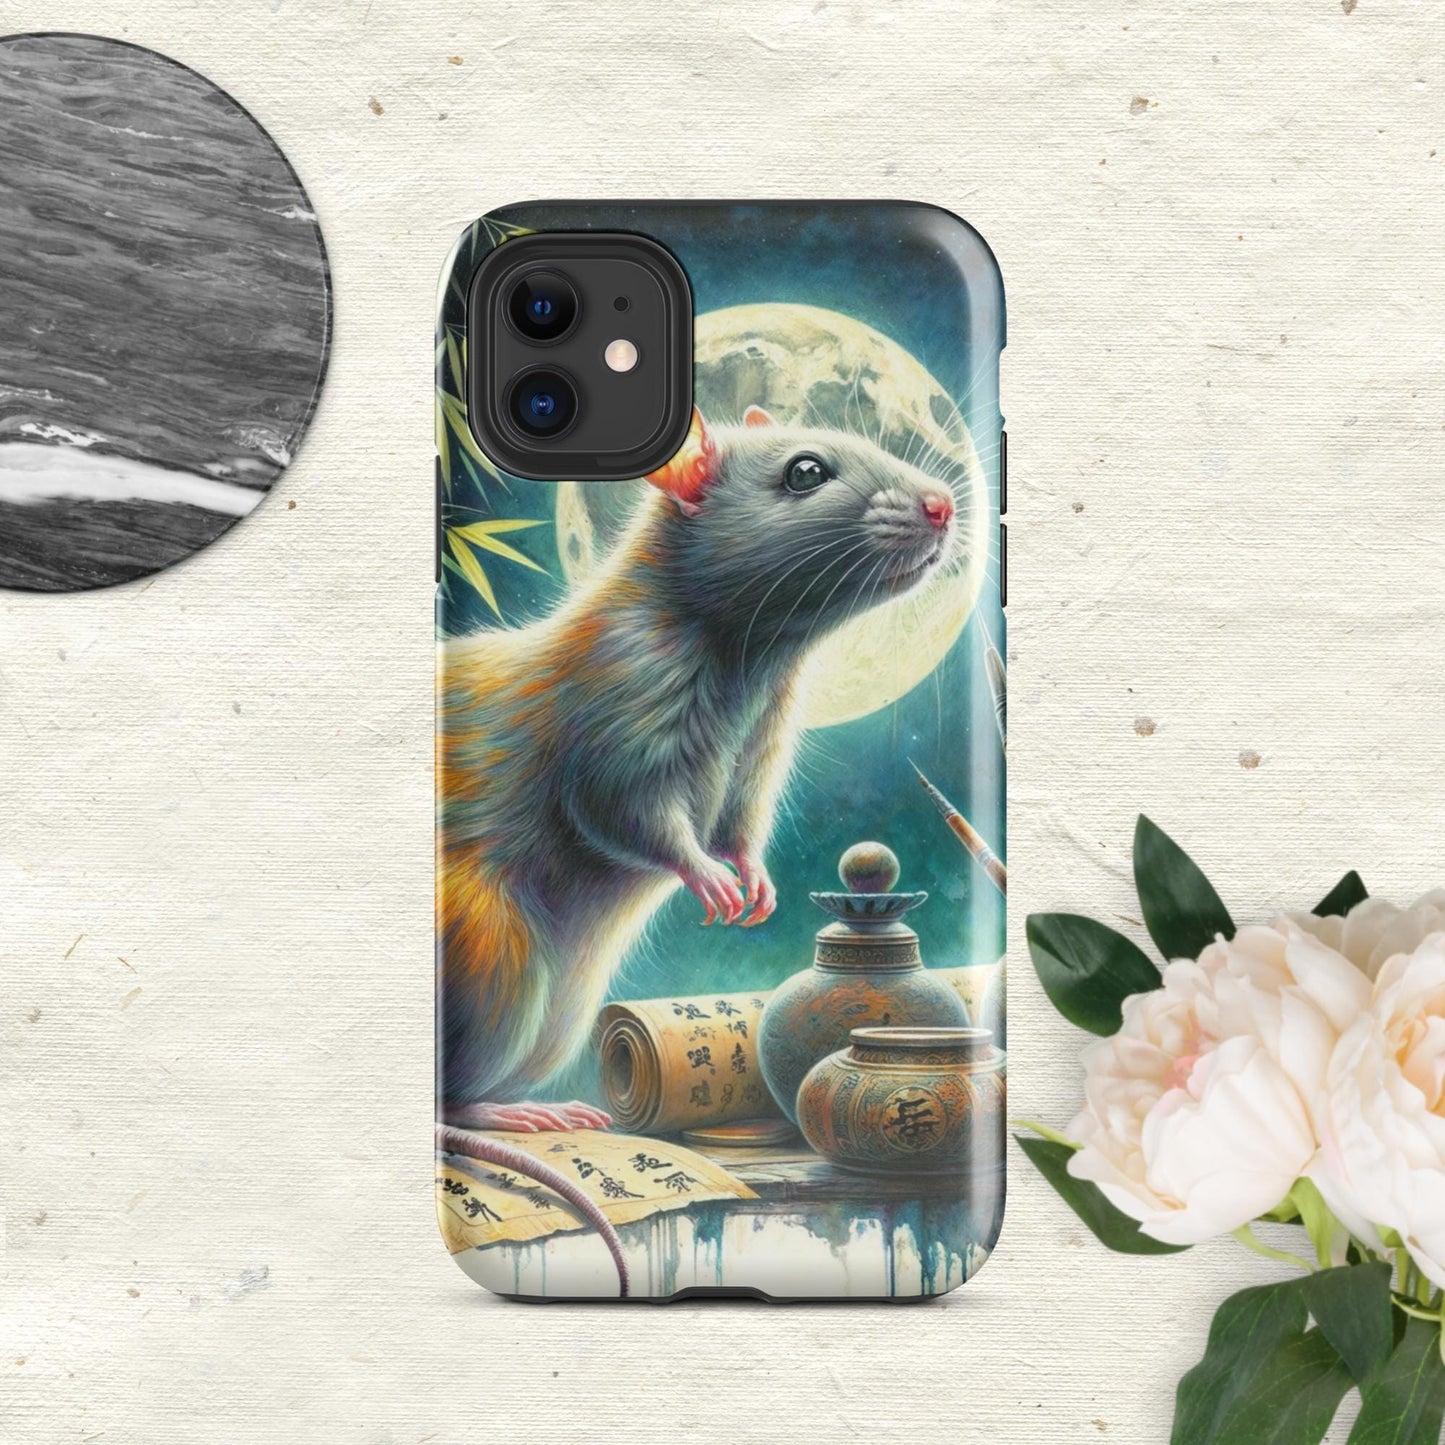 The Hologram Hook Up Glossy / iPhone 11 Rat Tough Case for iPhone®